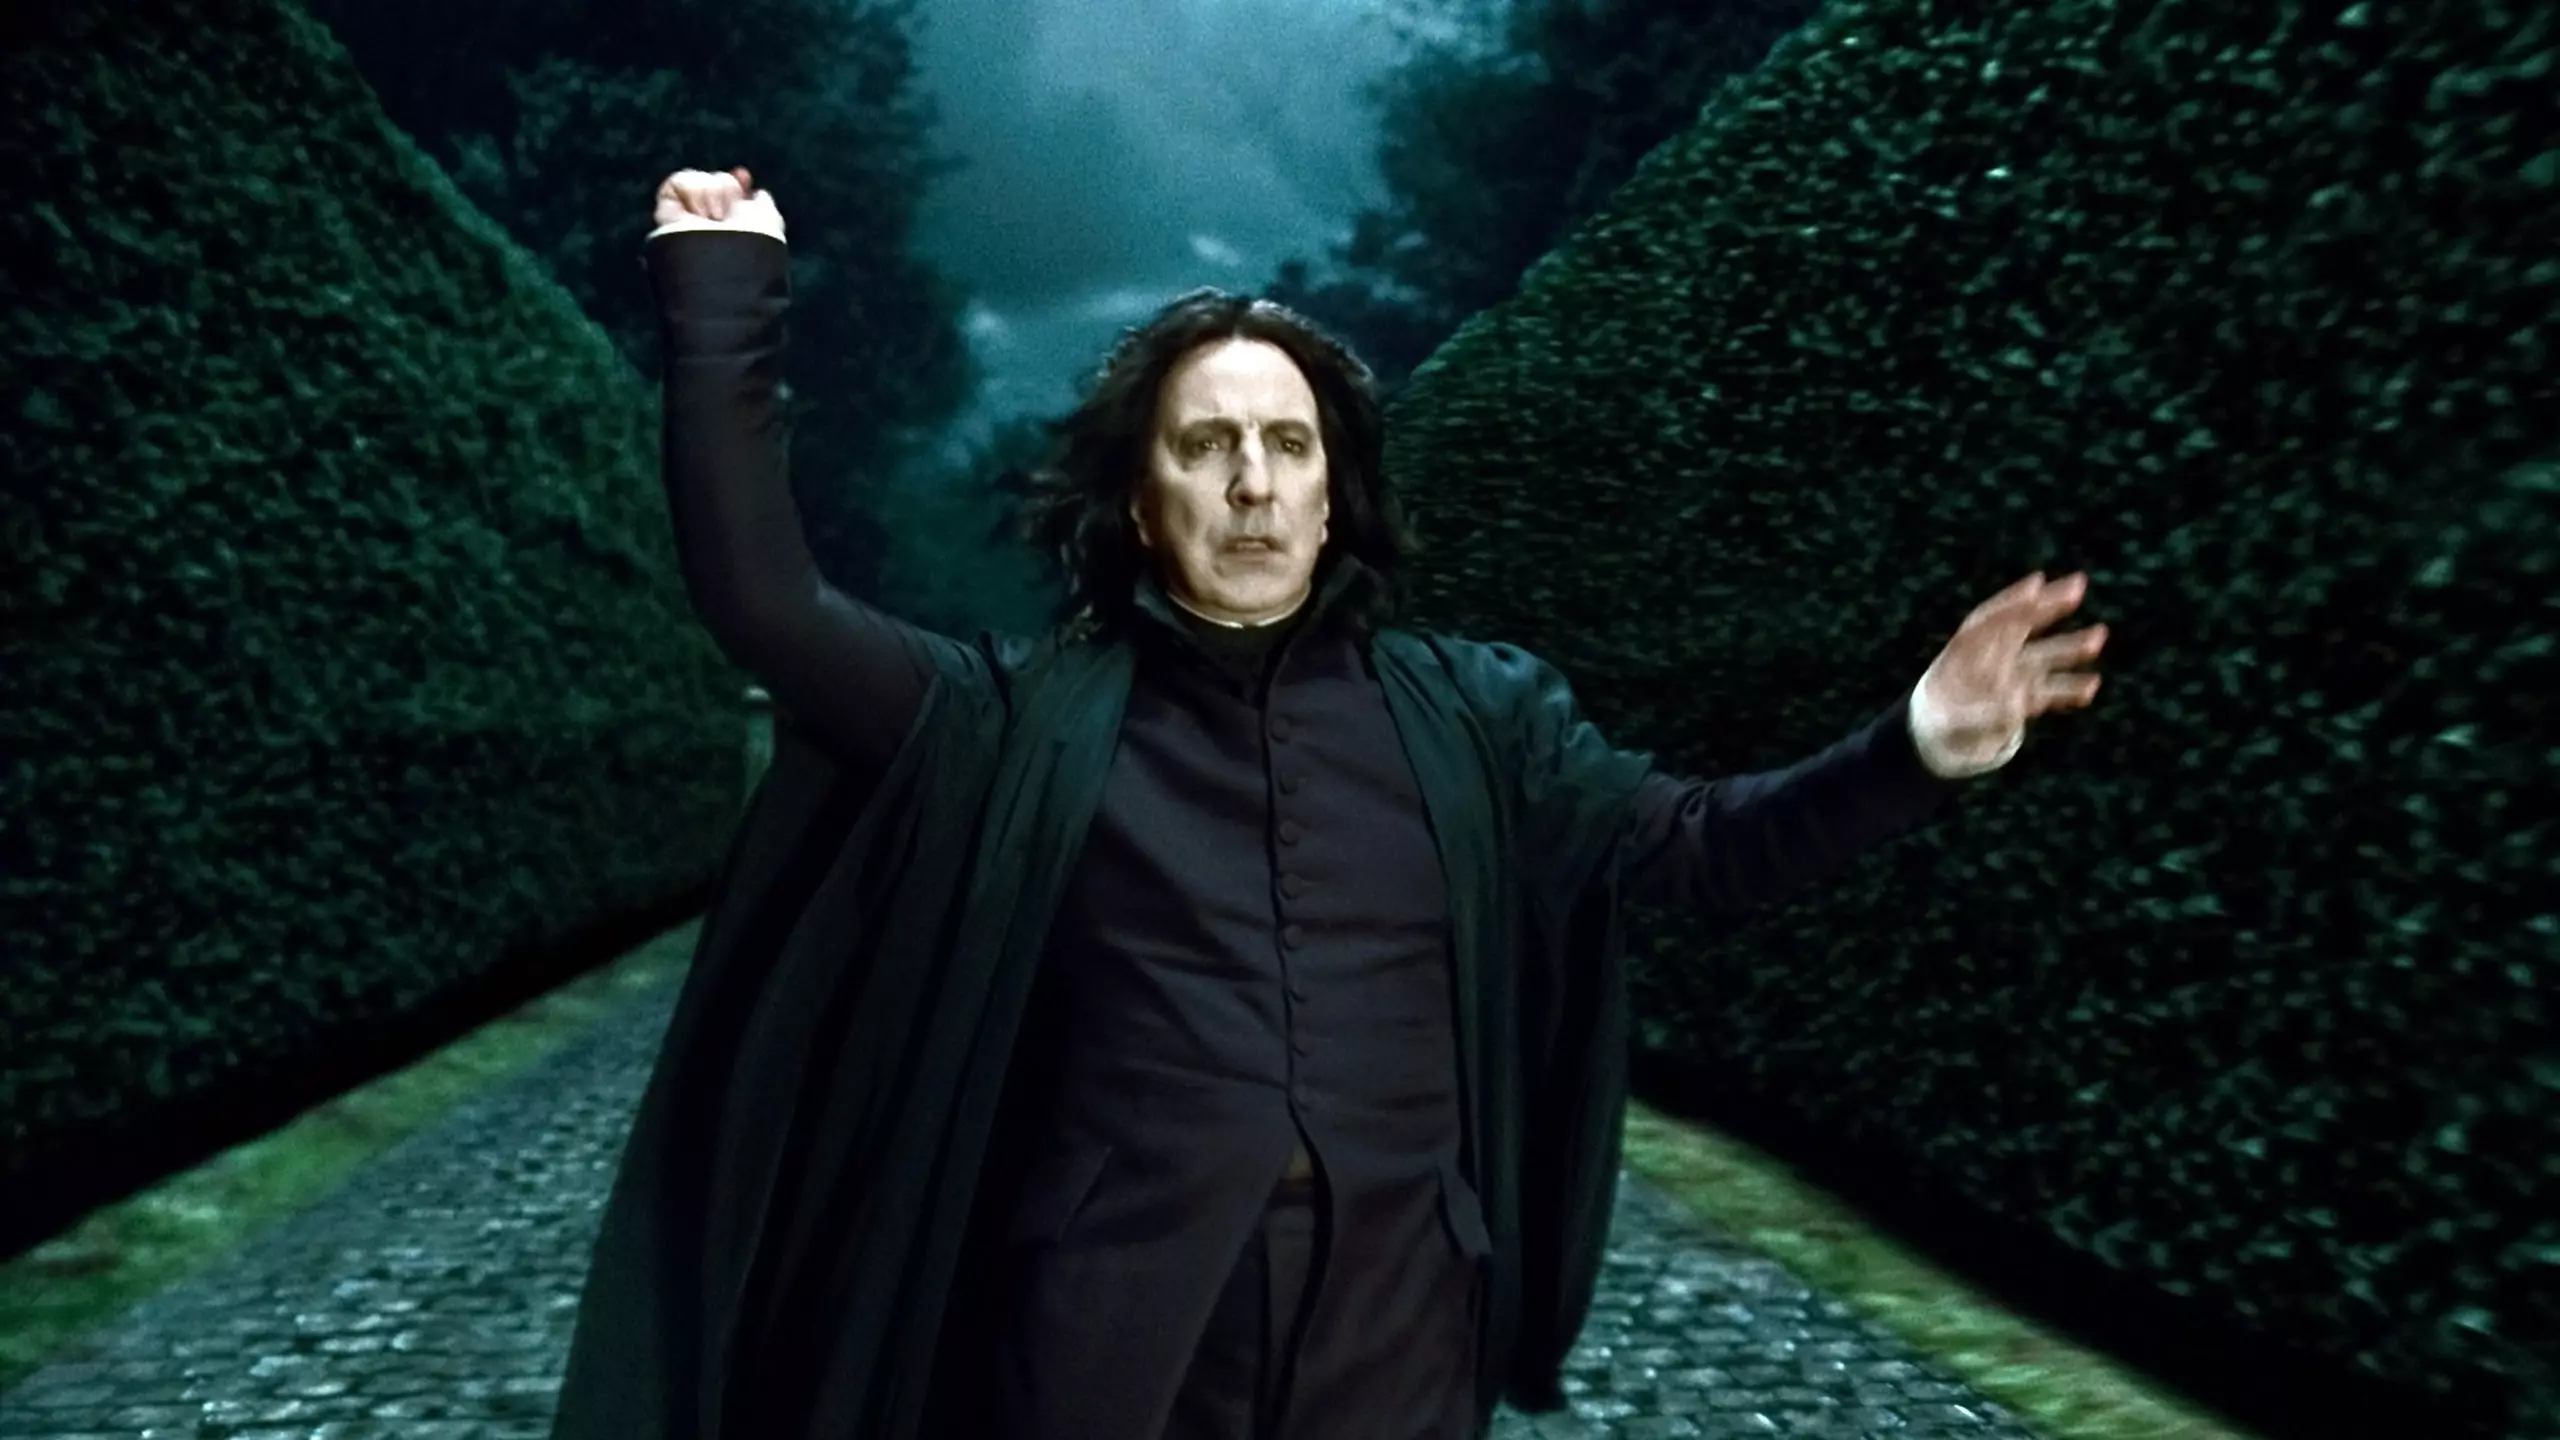 Alan Rickman played Severus Snape in the Harry Potter franchise (